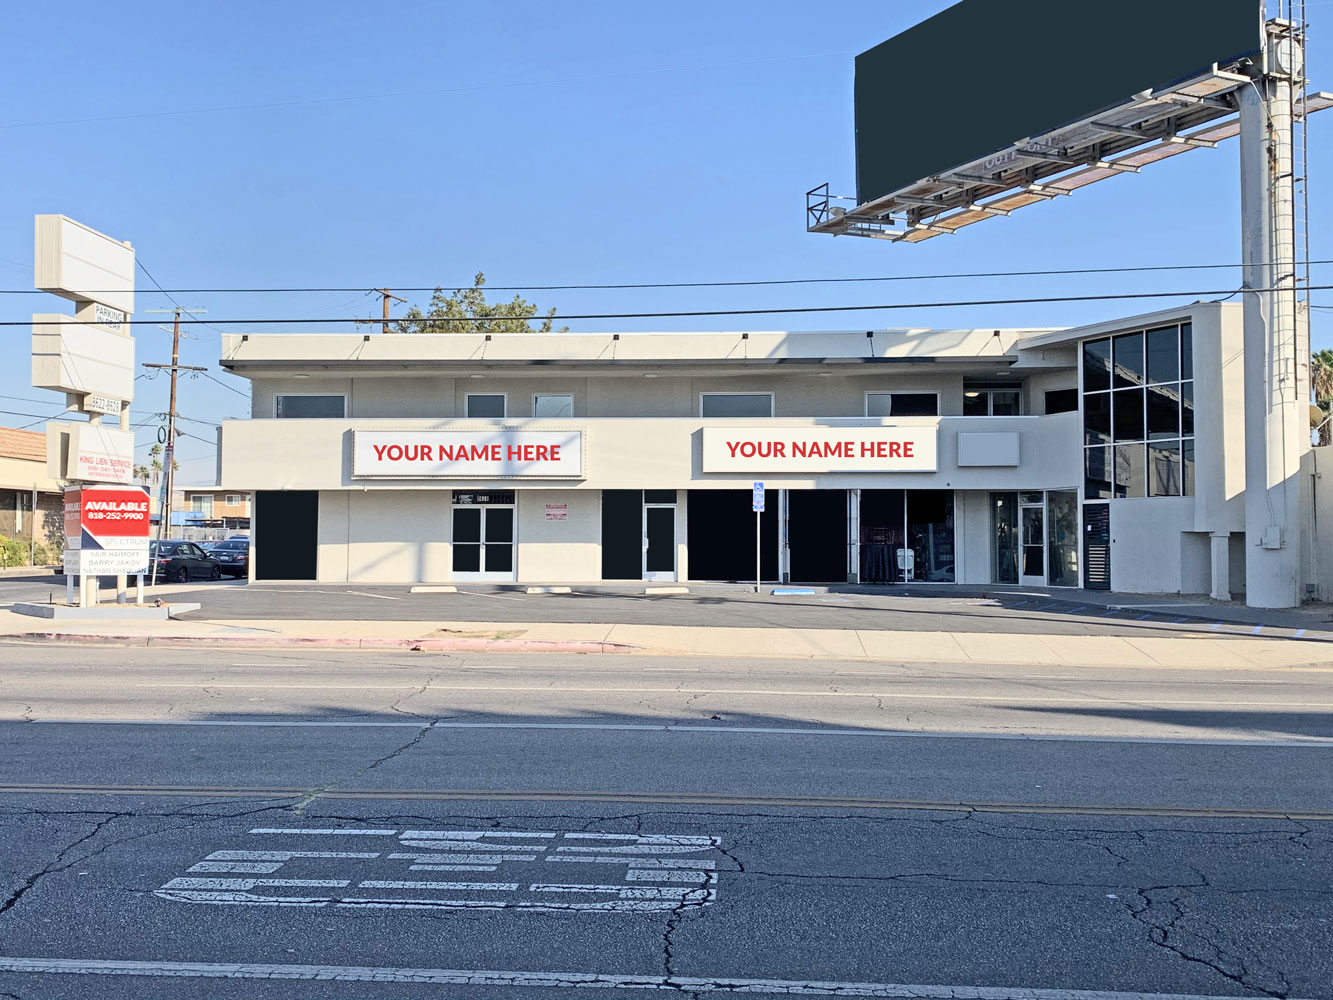 two-story commercial building located in Northridge, CA